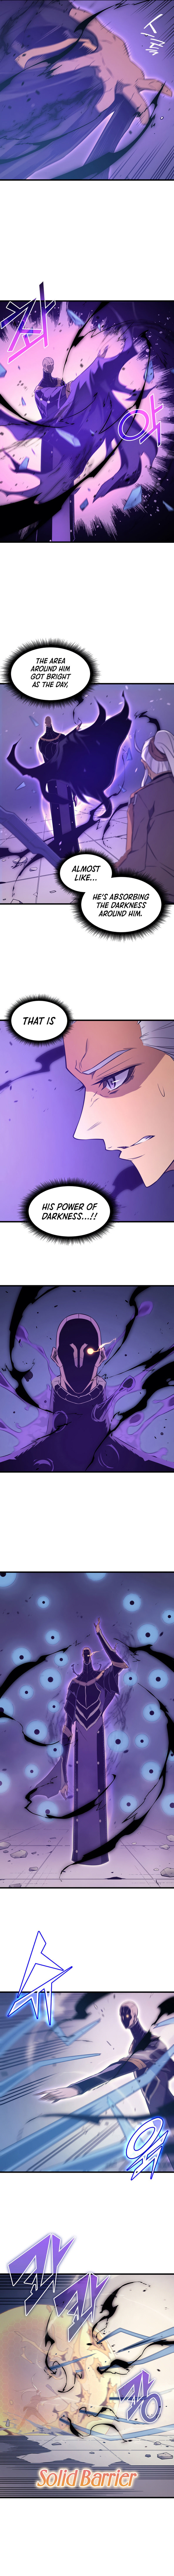 The Great Mage Returns After 4000 Years - Chapter 120 Page 3